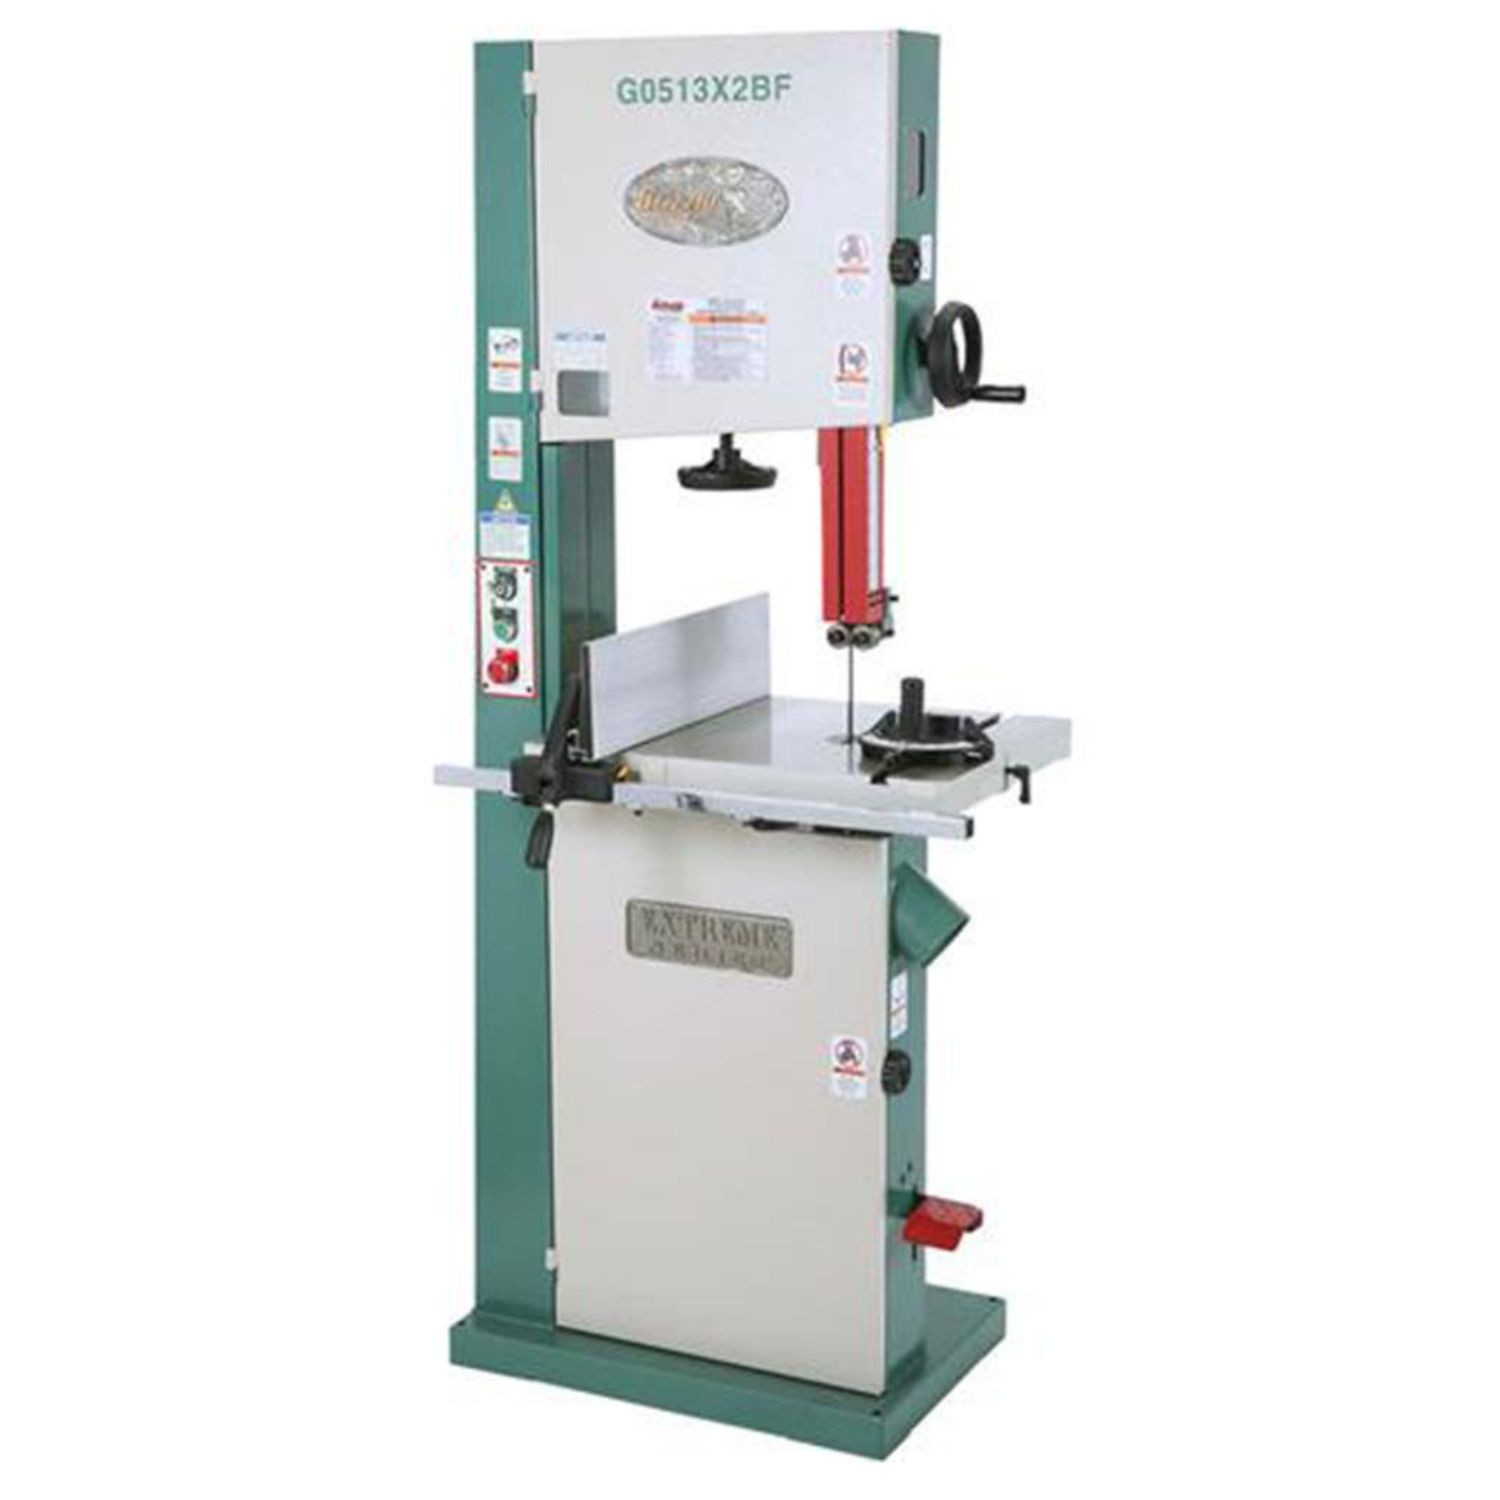 Grizzly Industrial 17-Inch Extreme-Series Band Saw